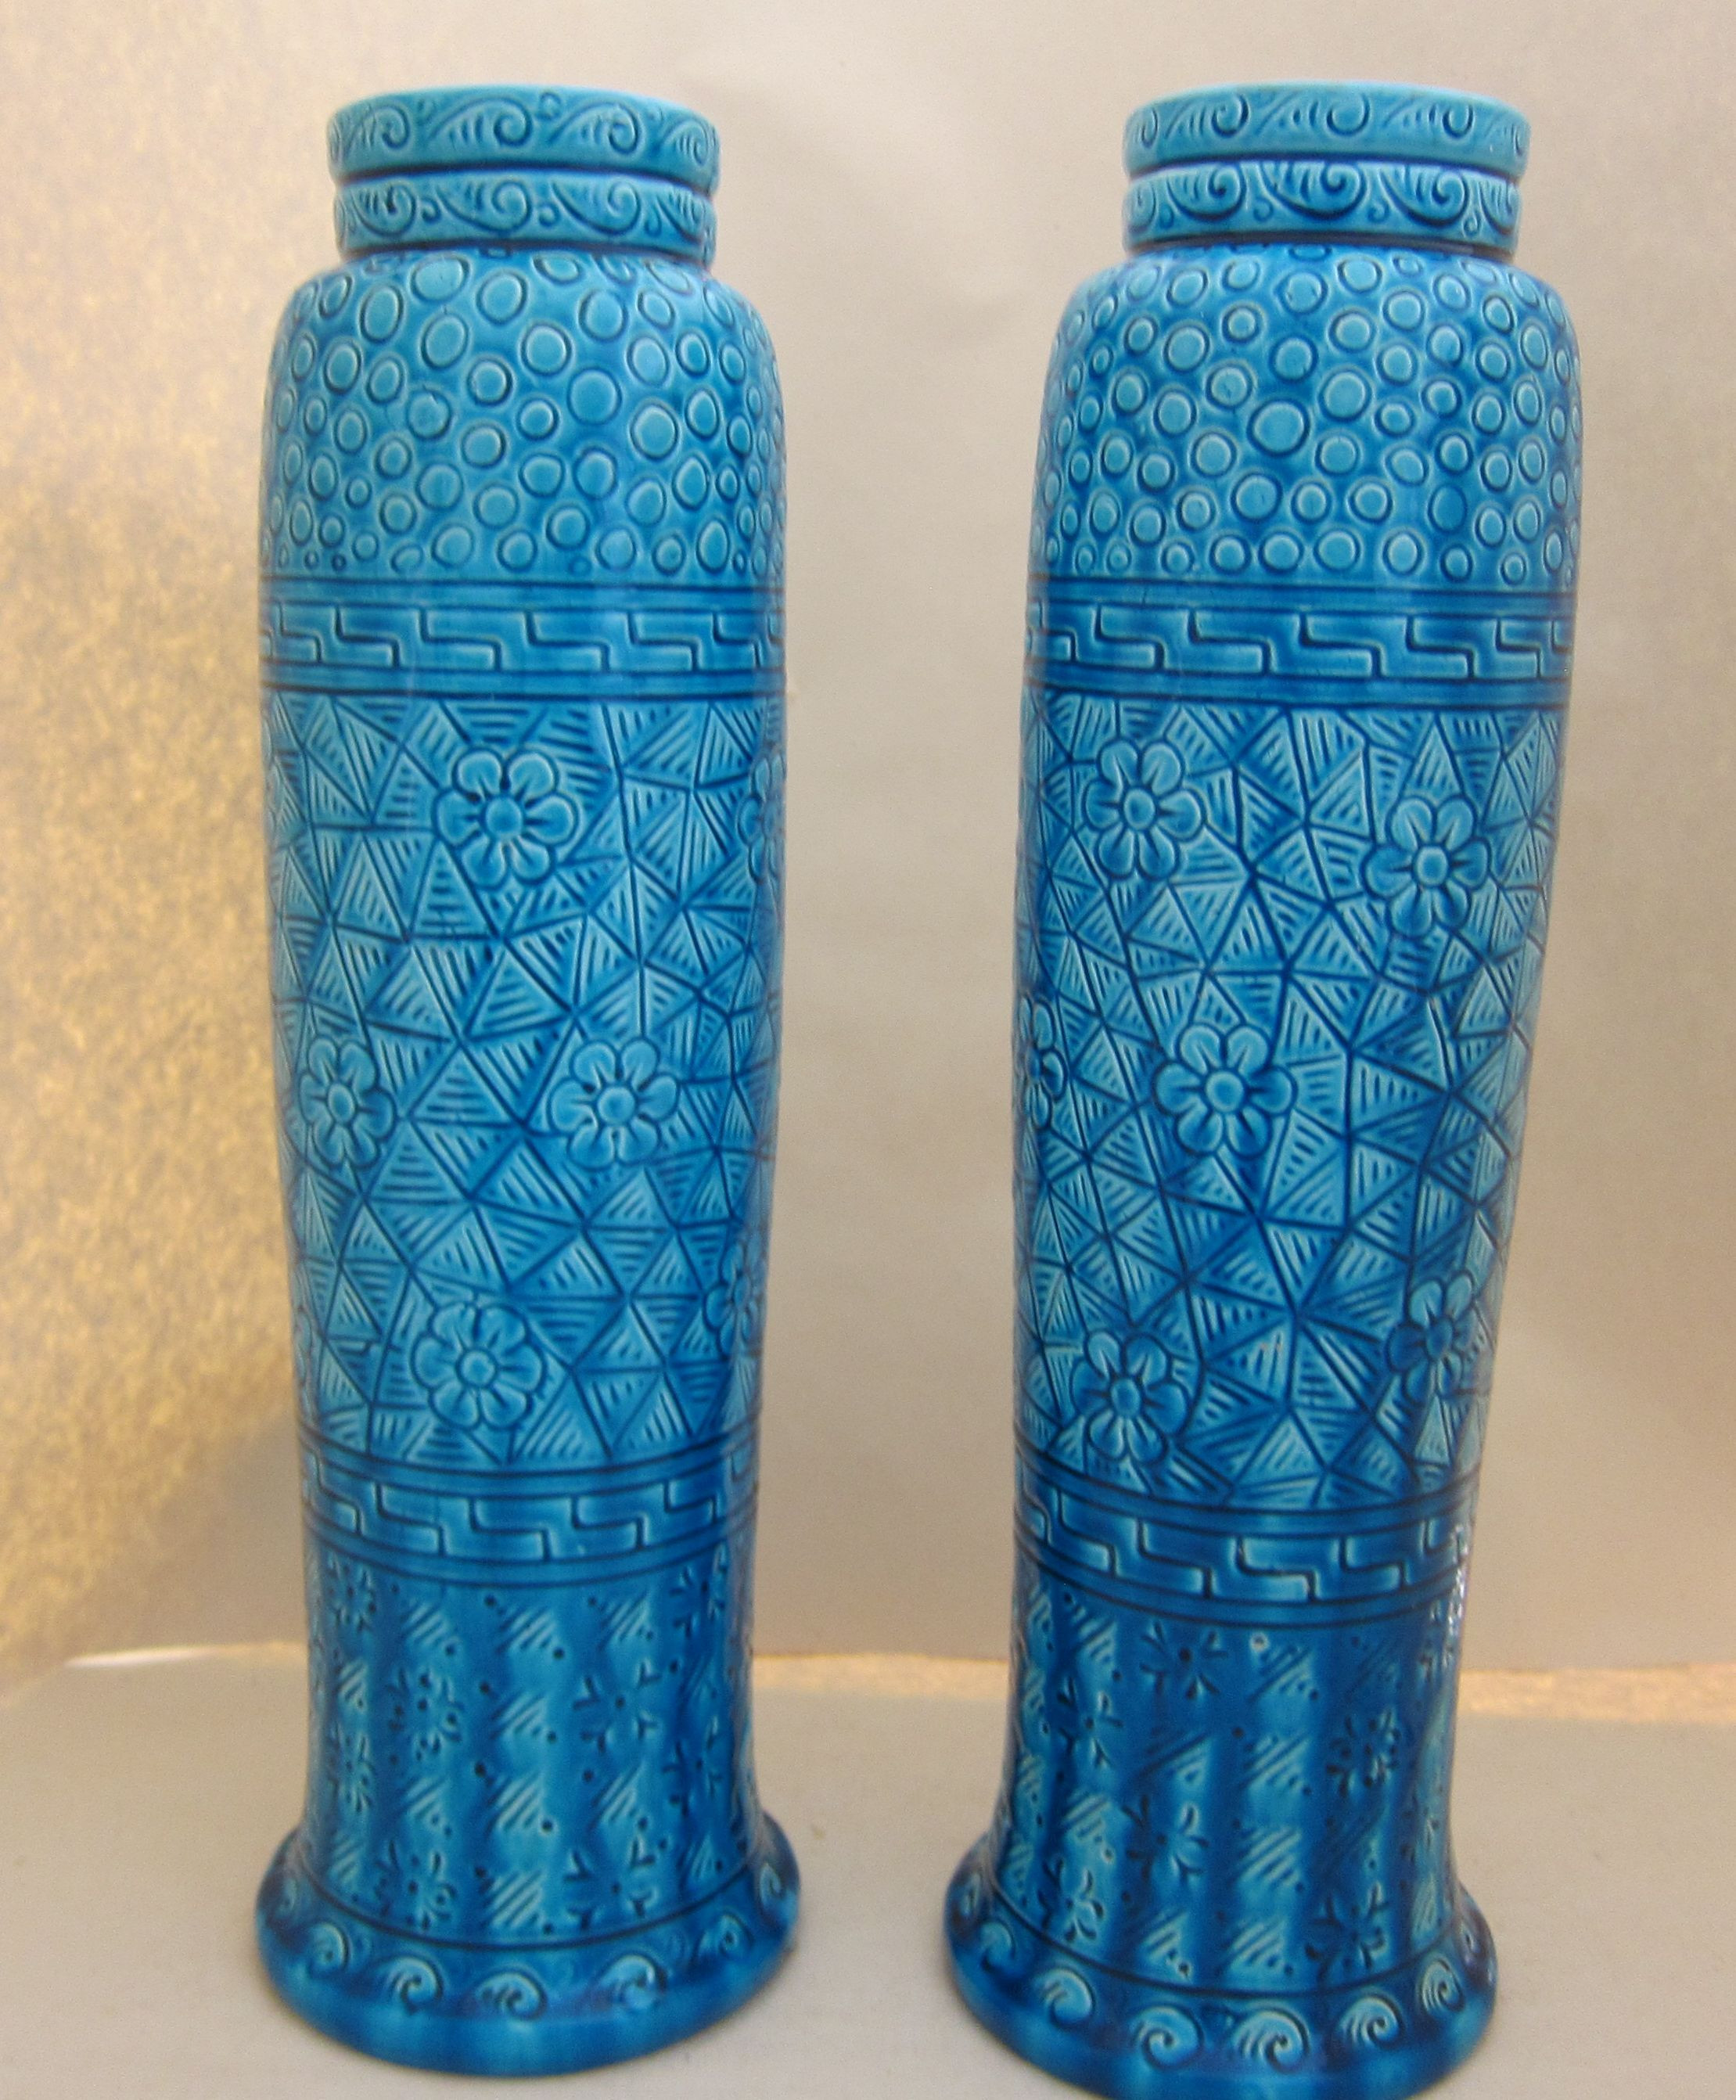 18 Lovable 12 Inch Ceramic Vase 2024 free download 12 inch ceramic vase of pair burmantofts faience fine glaze persian blue grass pattern vases pertaining to pair burmantofts faience fine glaze persian blue grass pattern vases pottery cerami